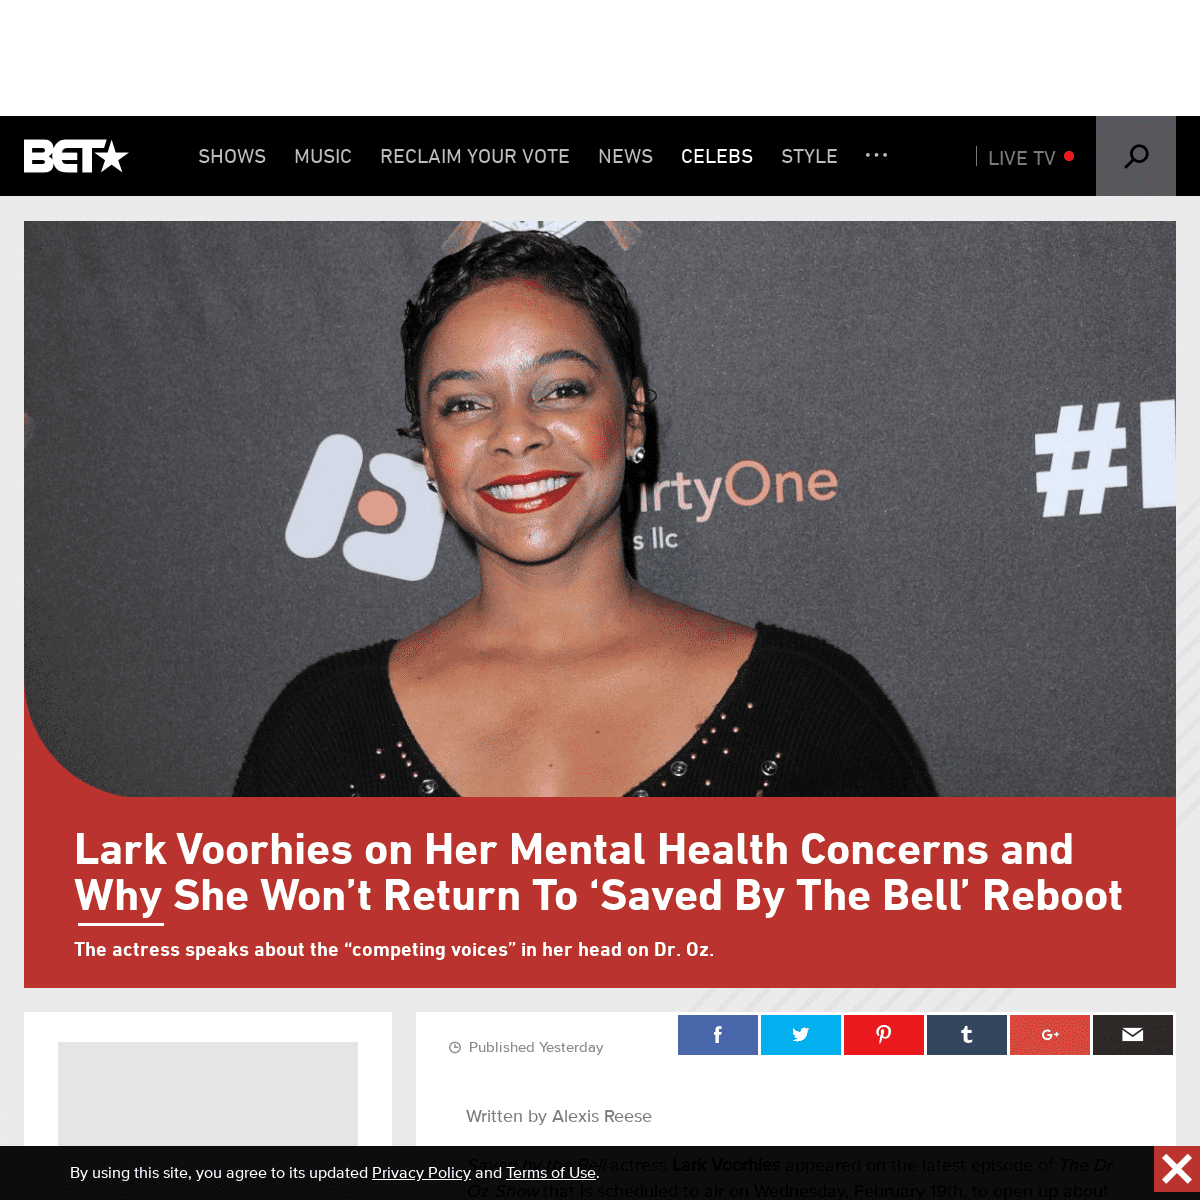 A complete backup of www.bet.com/celebrities/news/2020/02/19/lark-voorhies-on-her-mental-health-concerns-and-why-she-wont-ret.ht